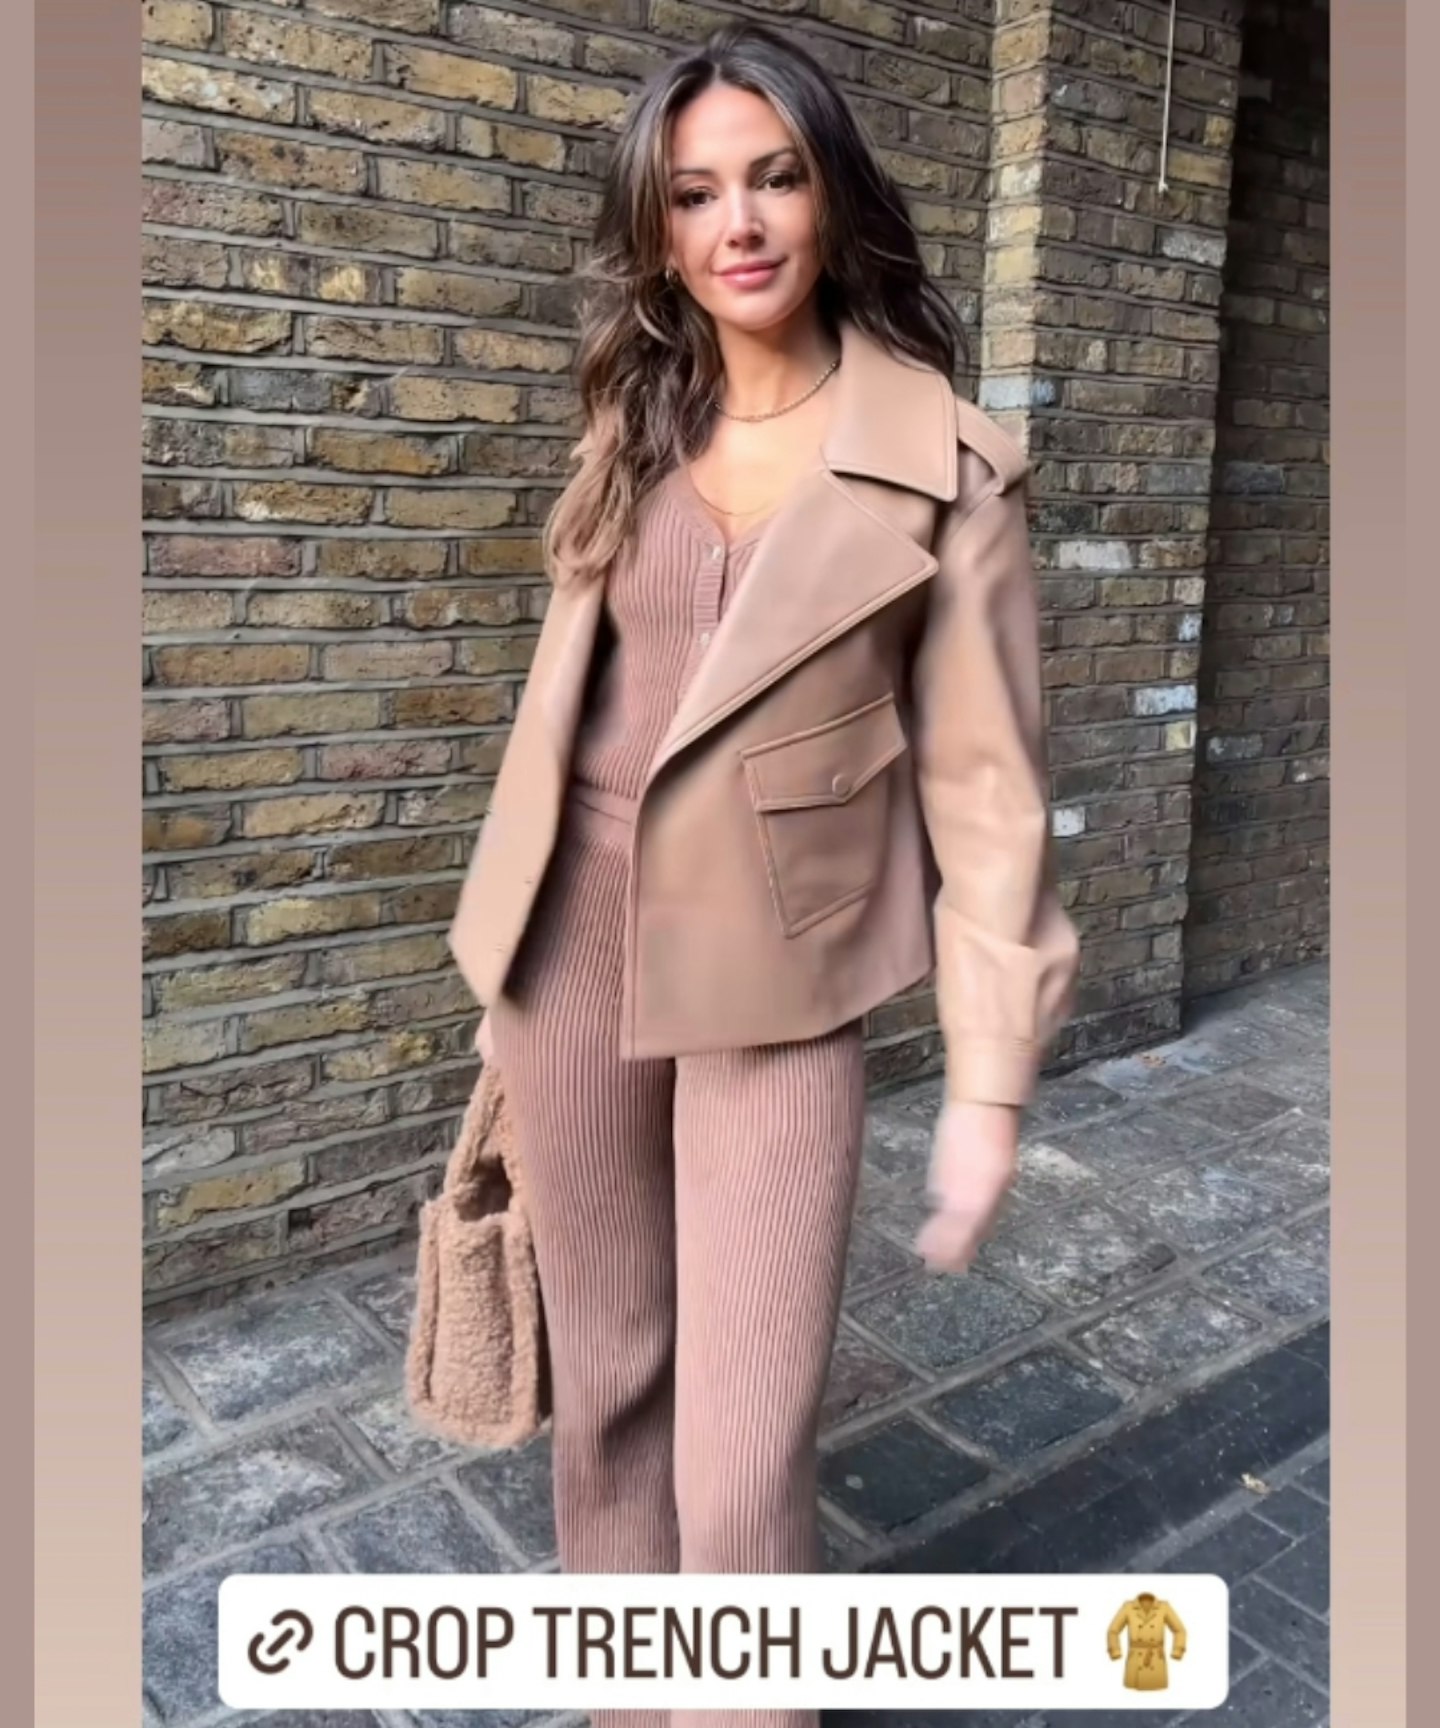 michelle-keegan-camel-outfit-instagram